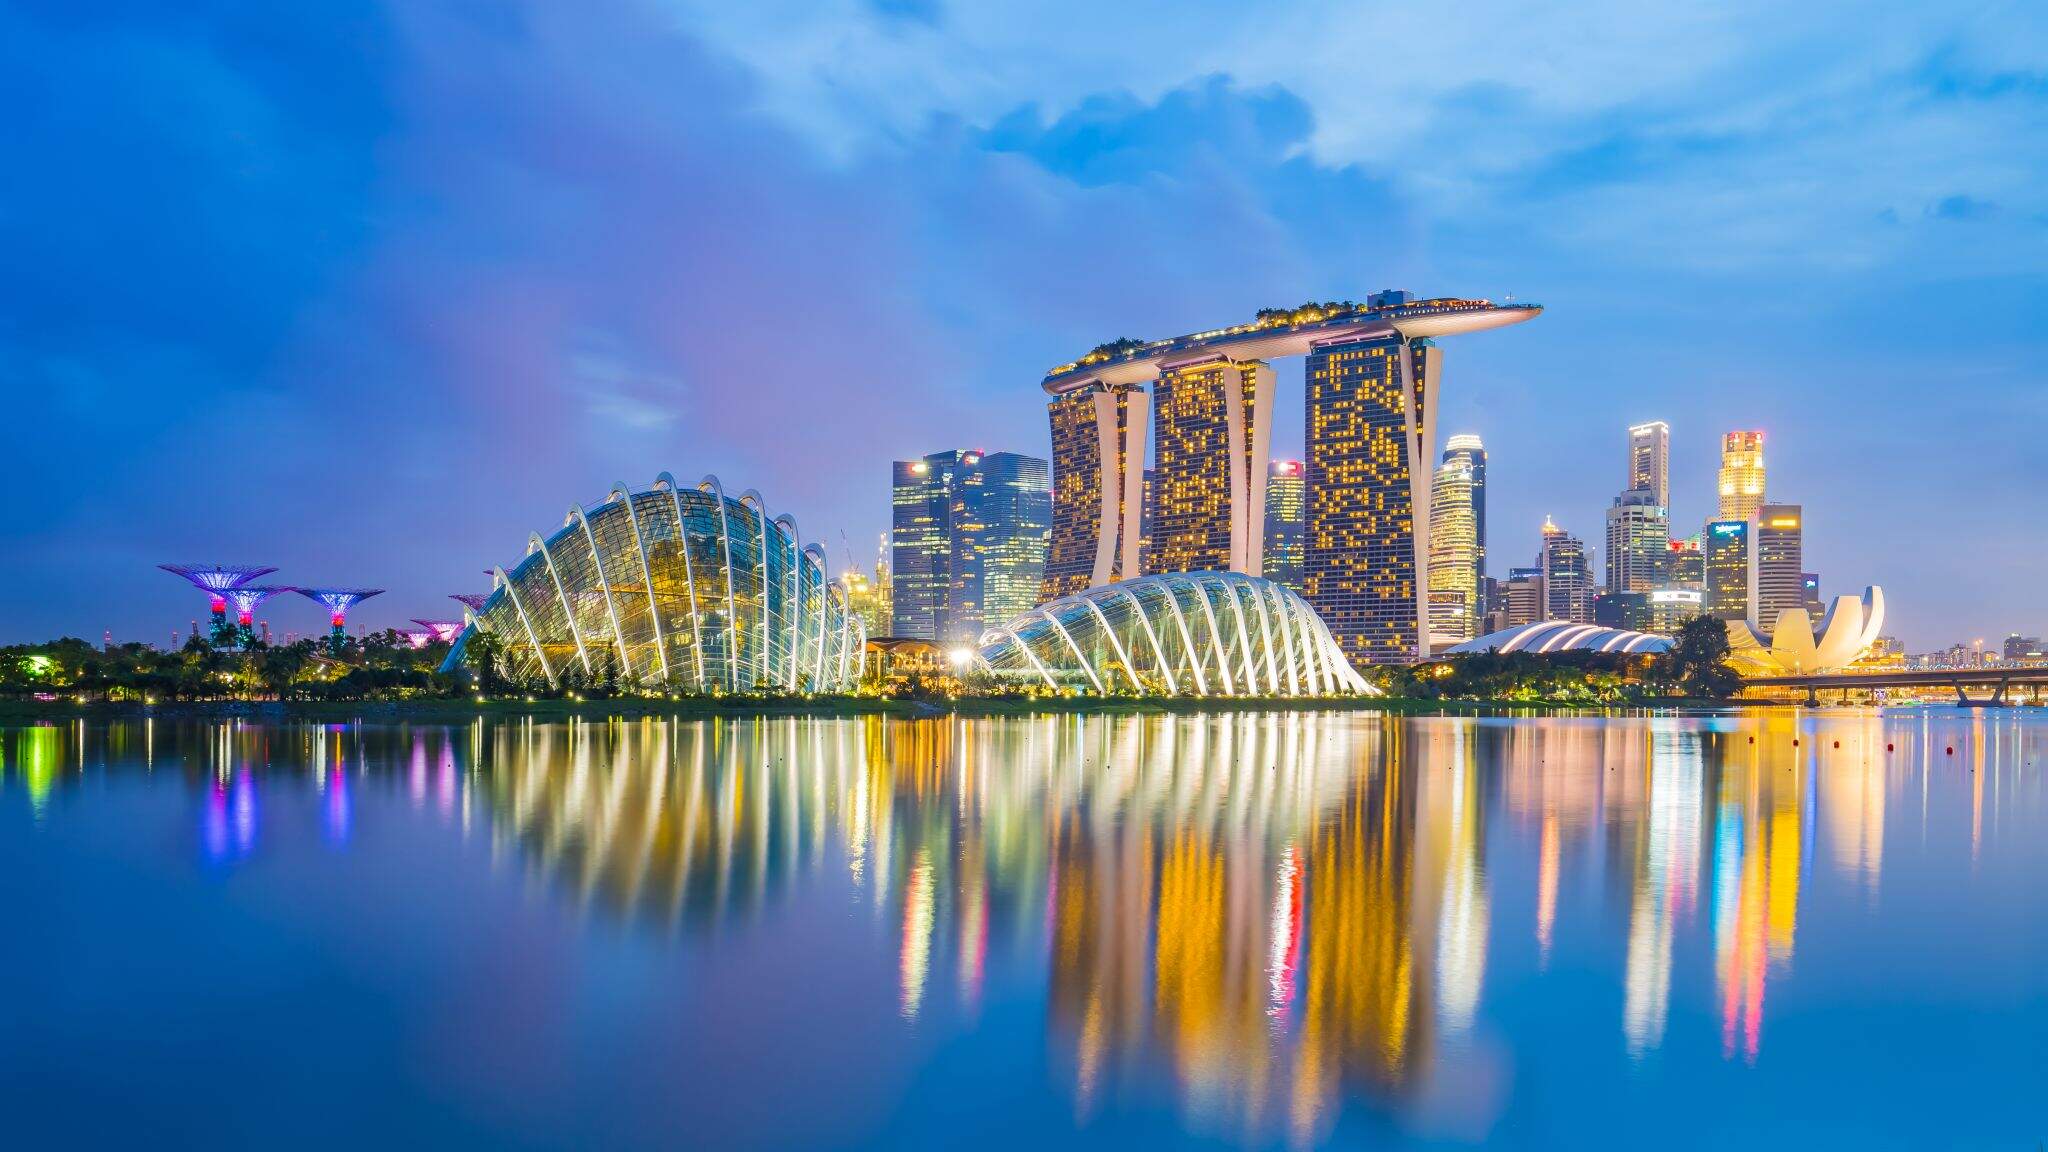 Impressive in any direction: Singapore